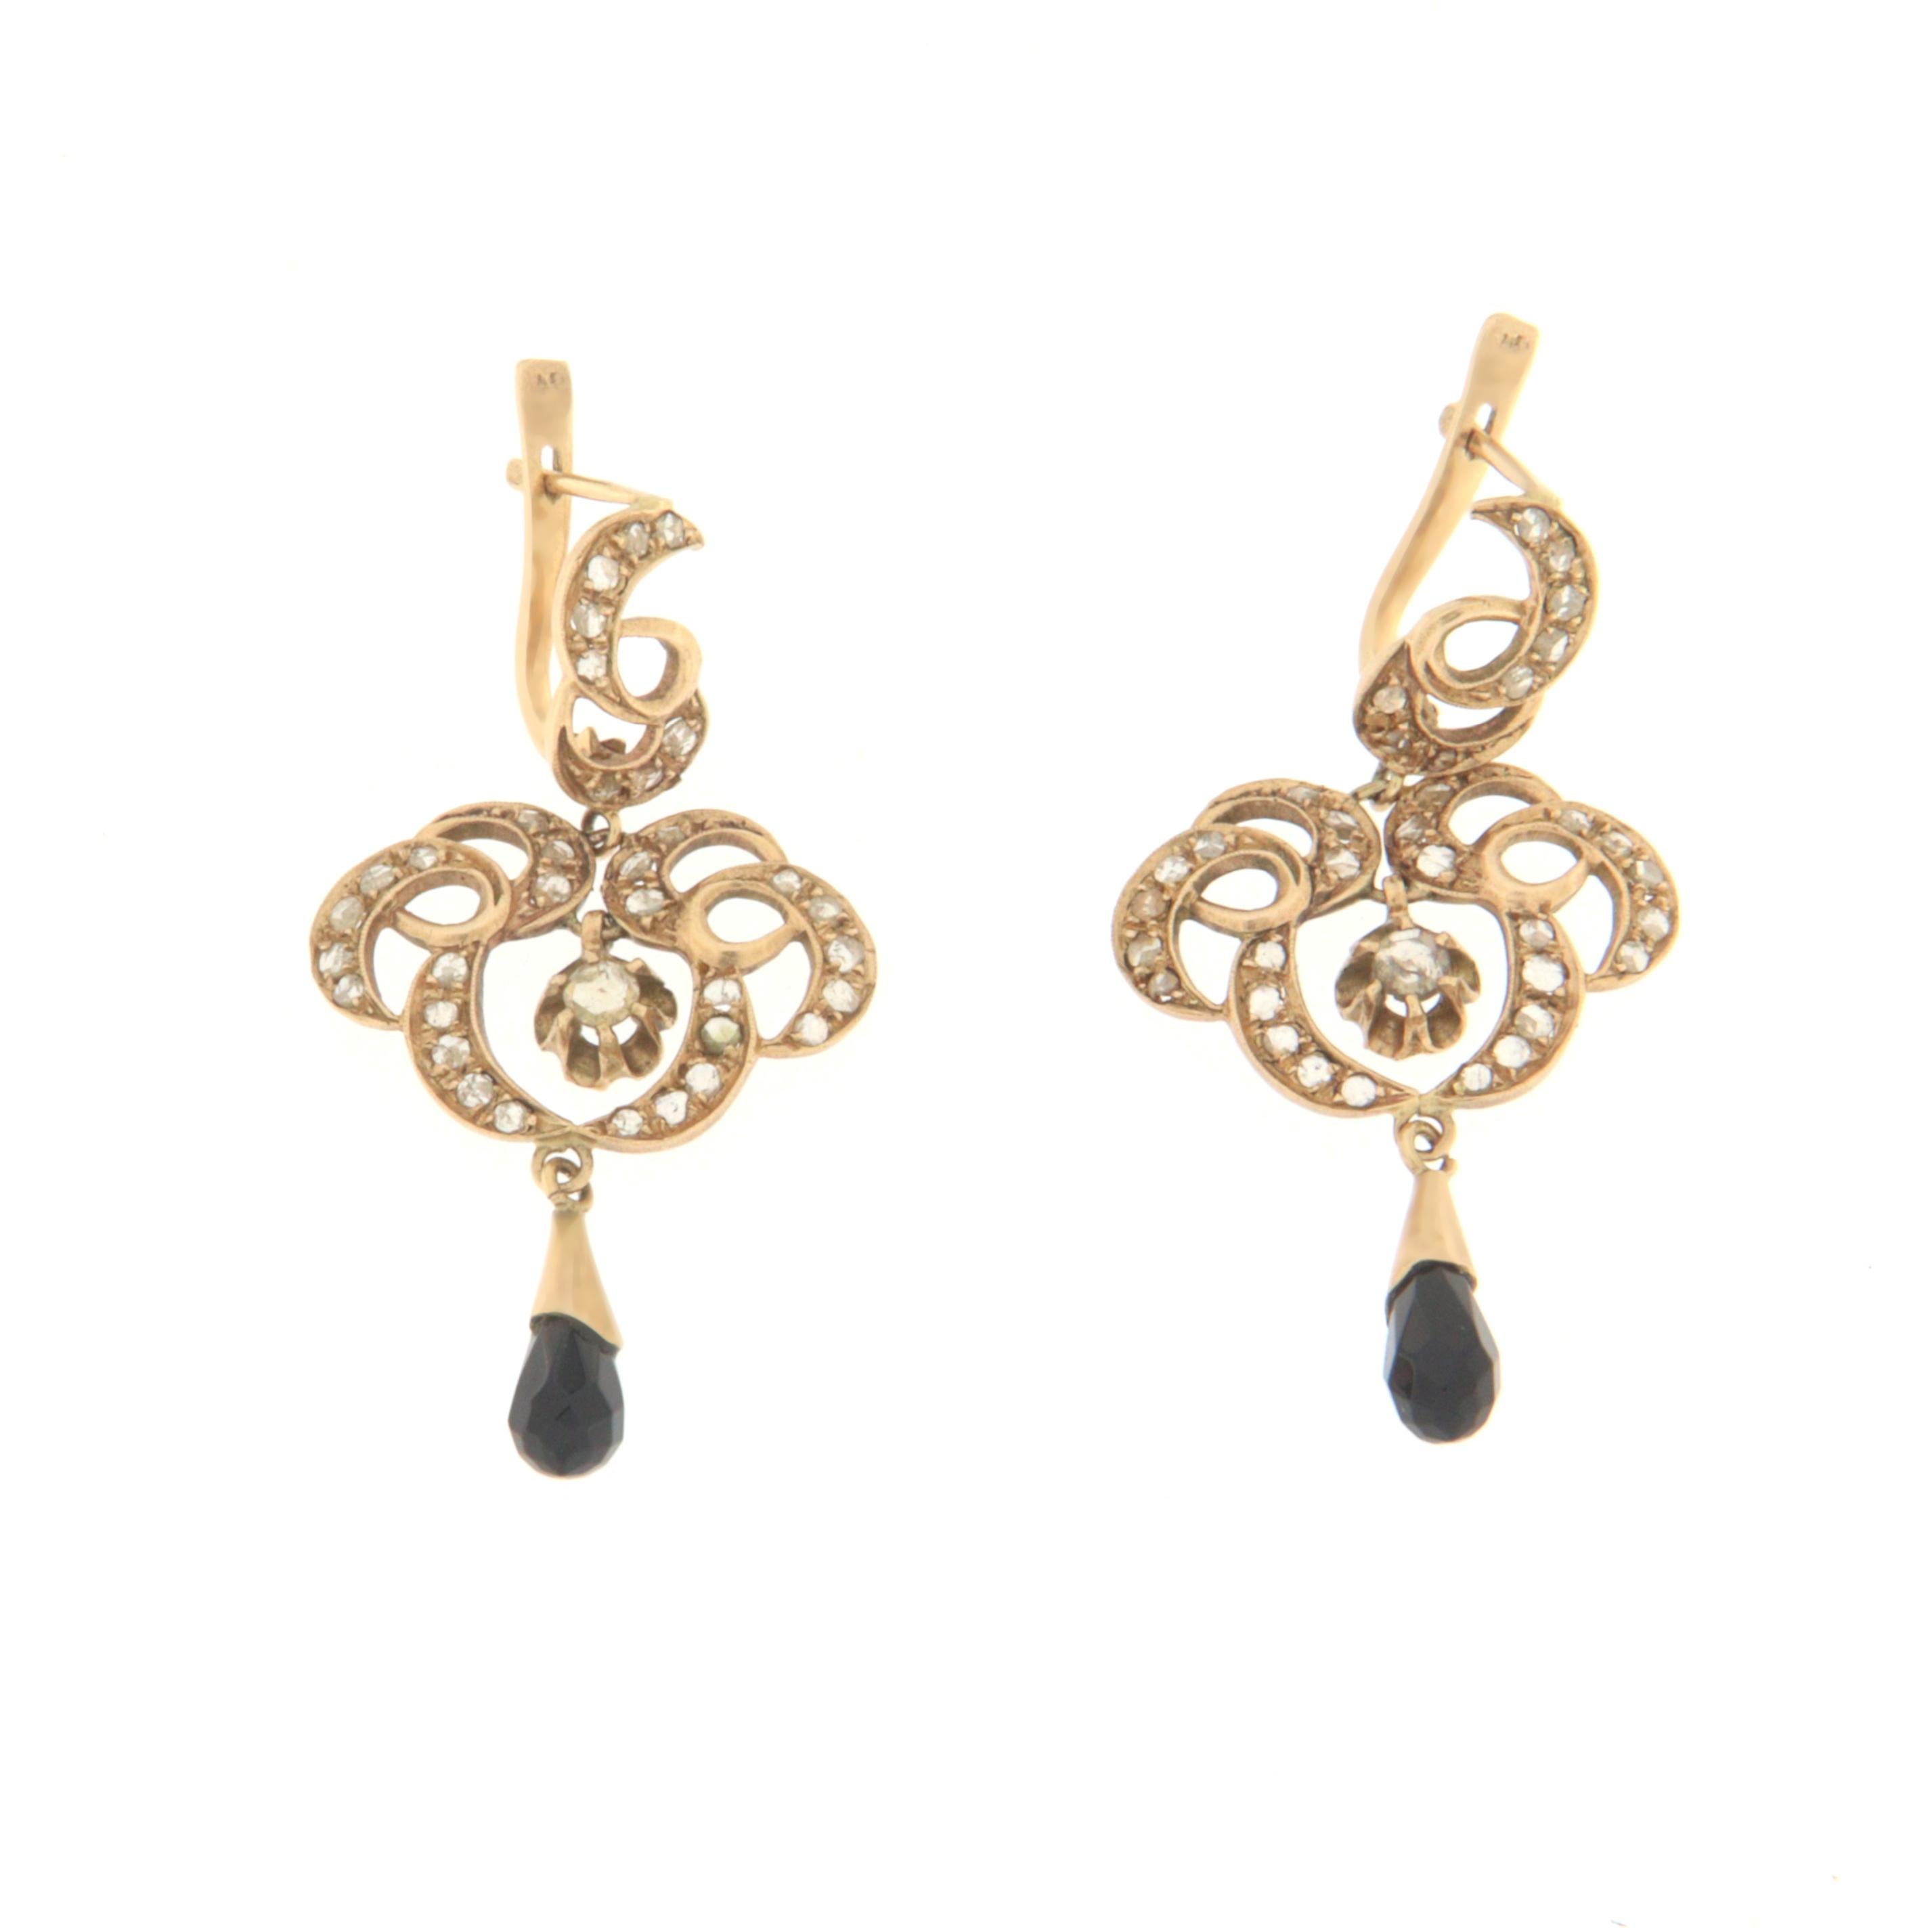 Antique 9 karat yellow gold drop earrings. Handmade by artisans assembled with rose cut diamonds and drop onyx

Earrings total weight 9.90 grams